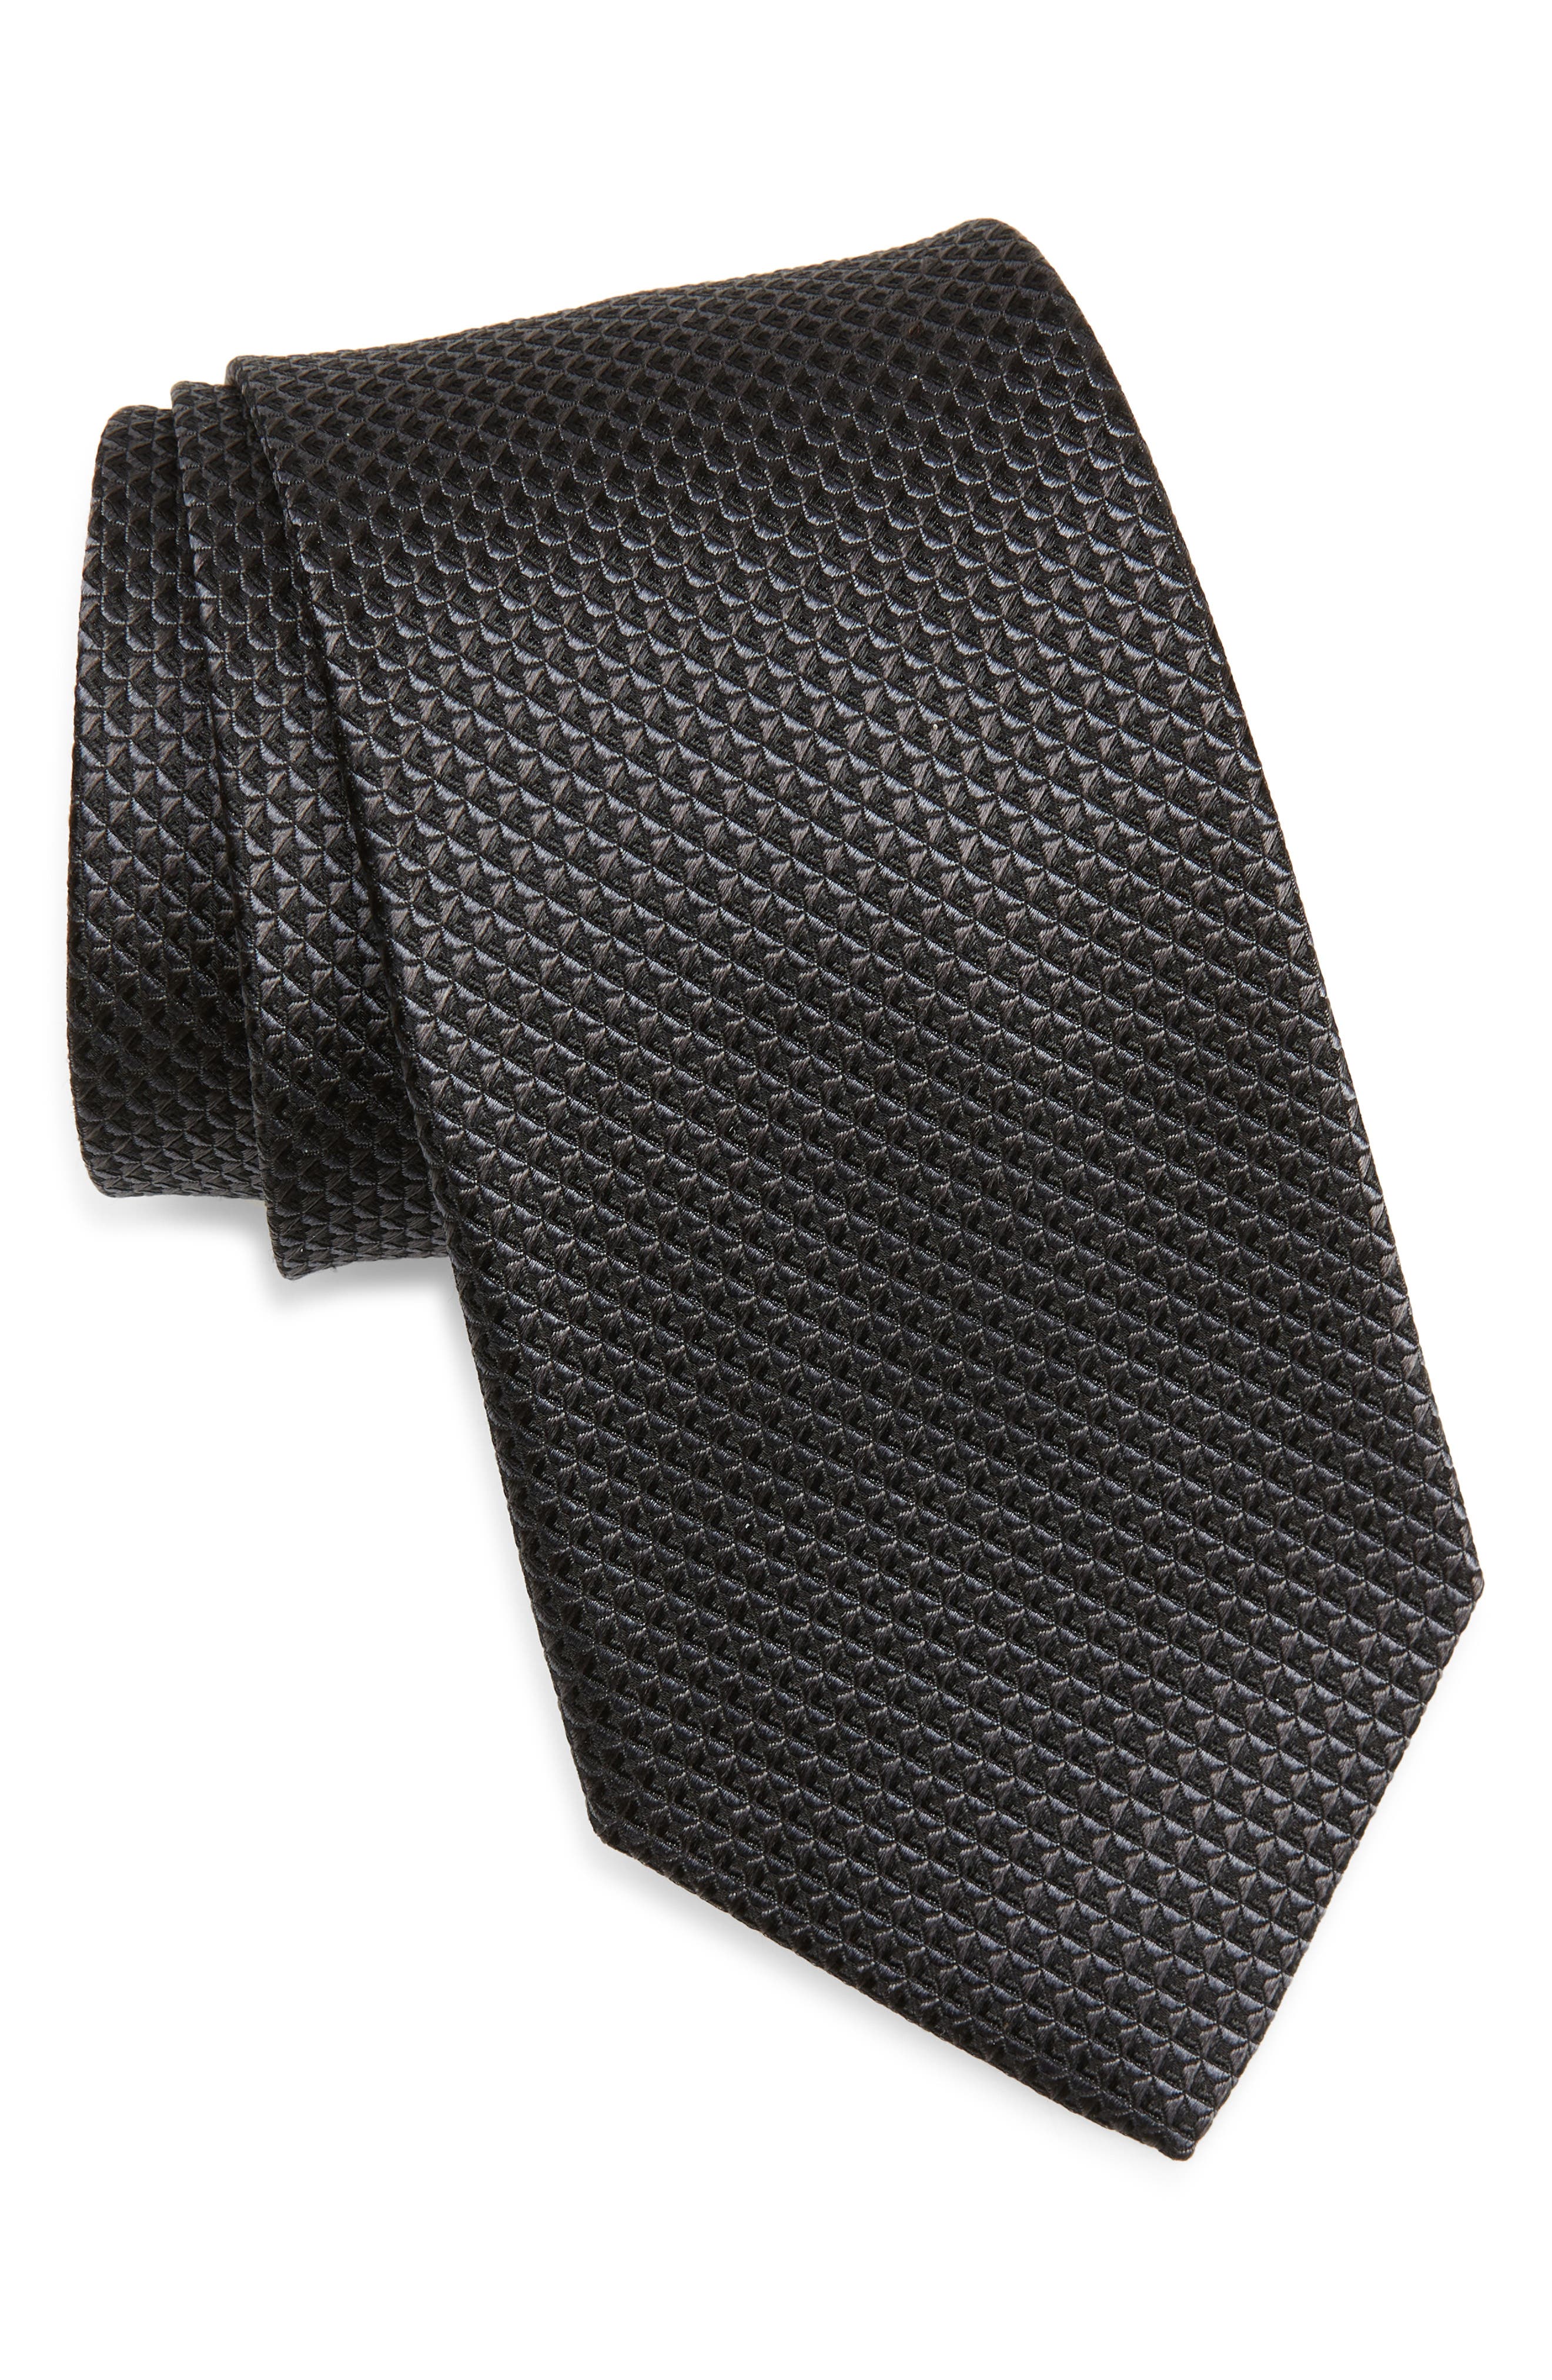 for Men Mens Accessories Ties Knightsbridge Neckwear Dogtooth Checked Silk Bow Tie in Black/White Black 